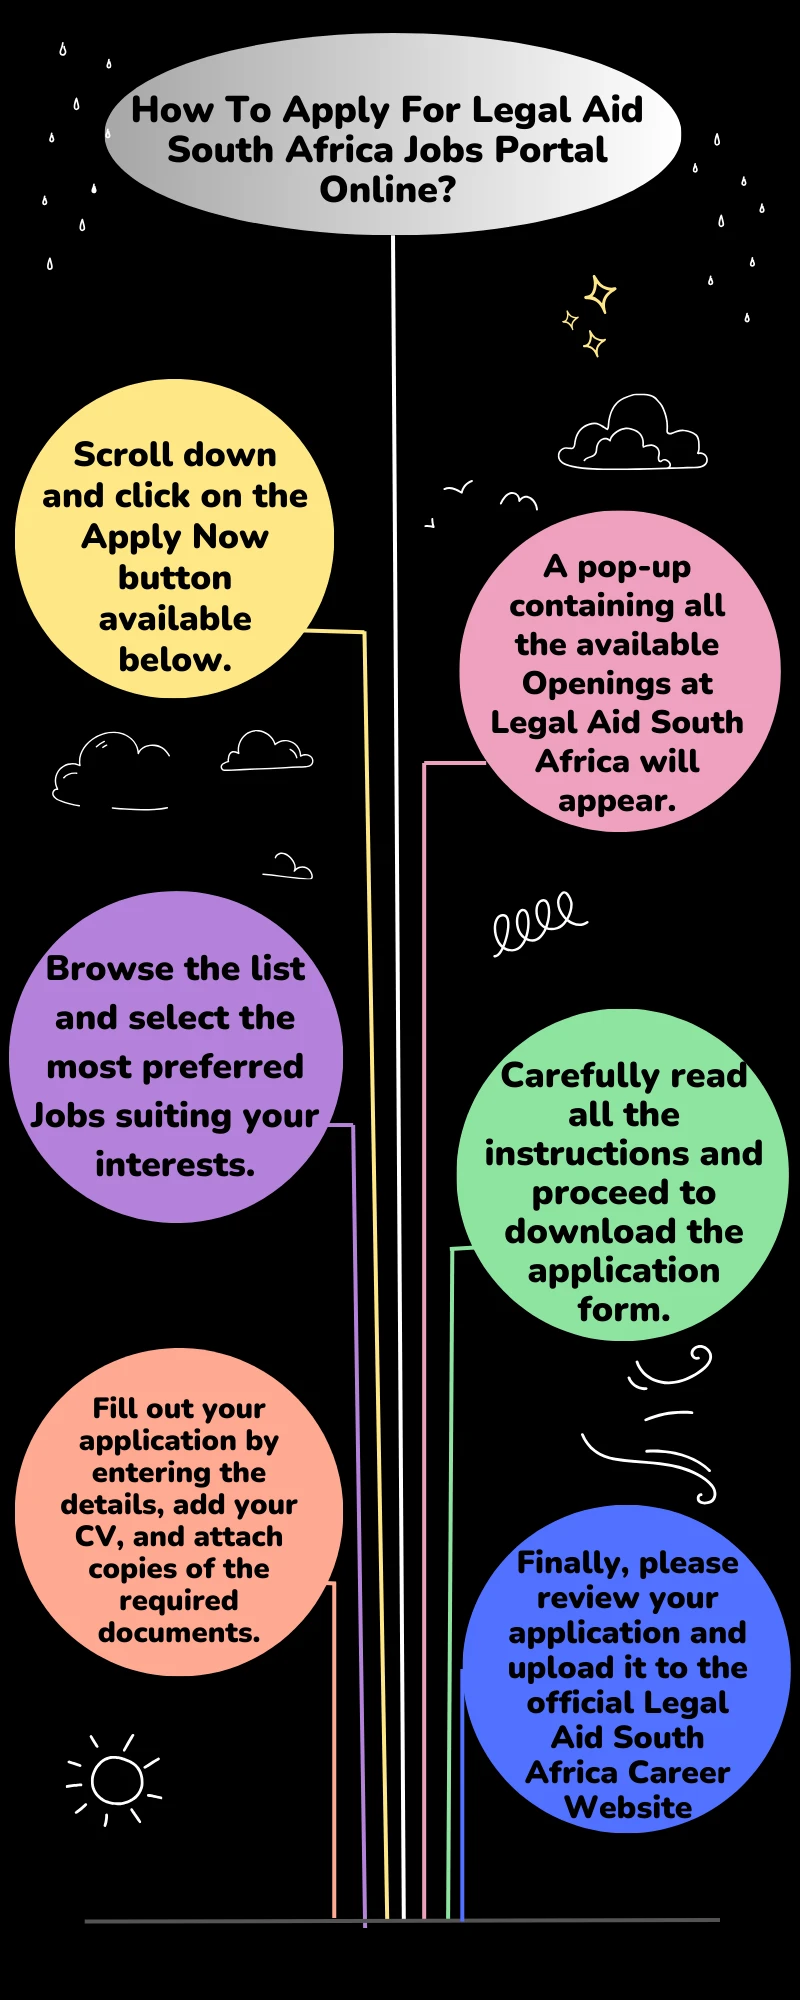 How To Apply For Legal Aid South Africa Jobs Portal Online